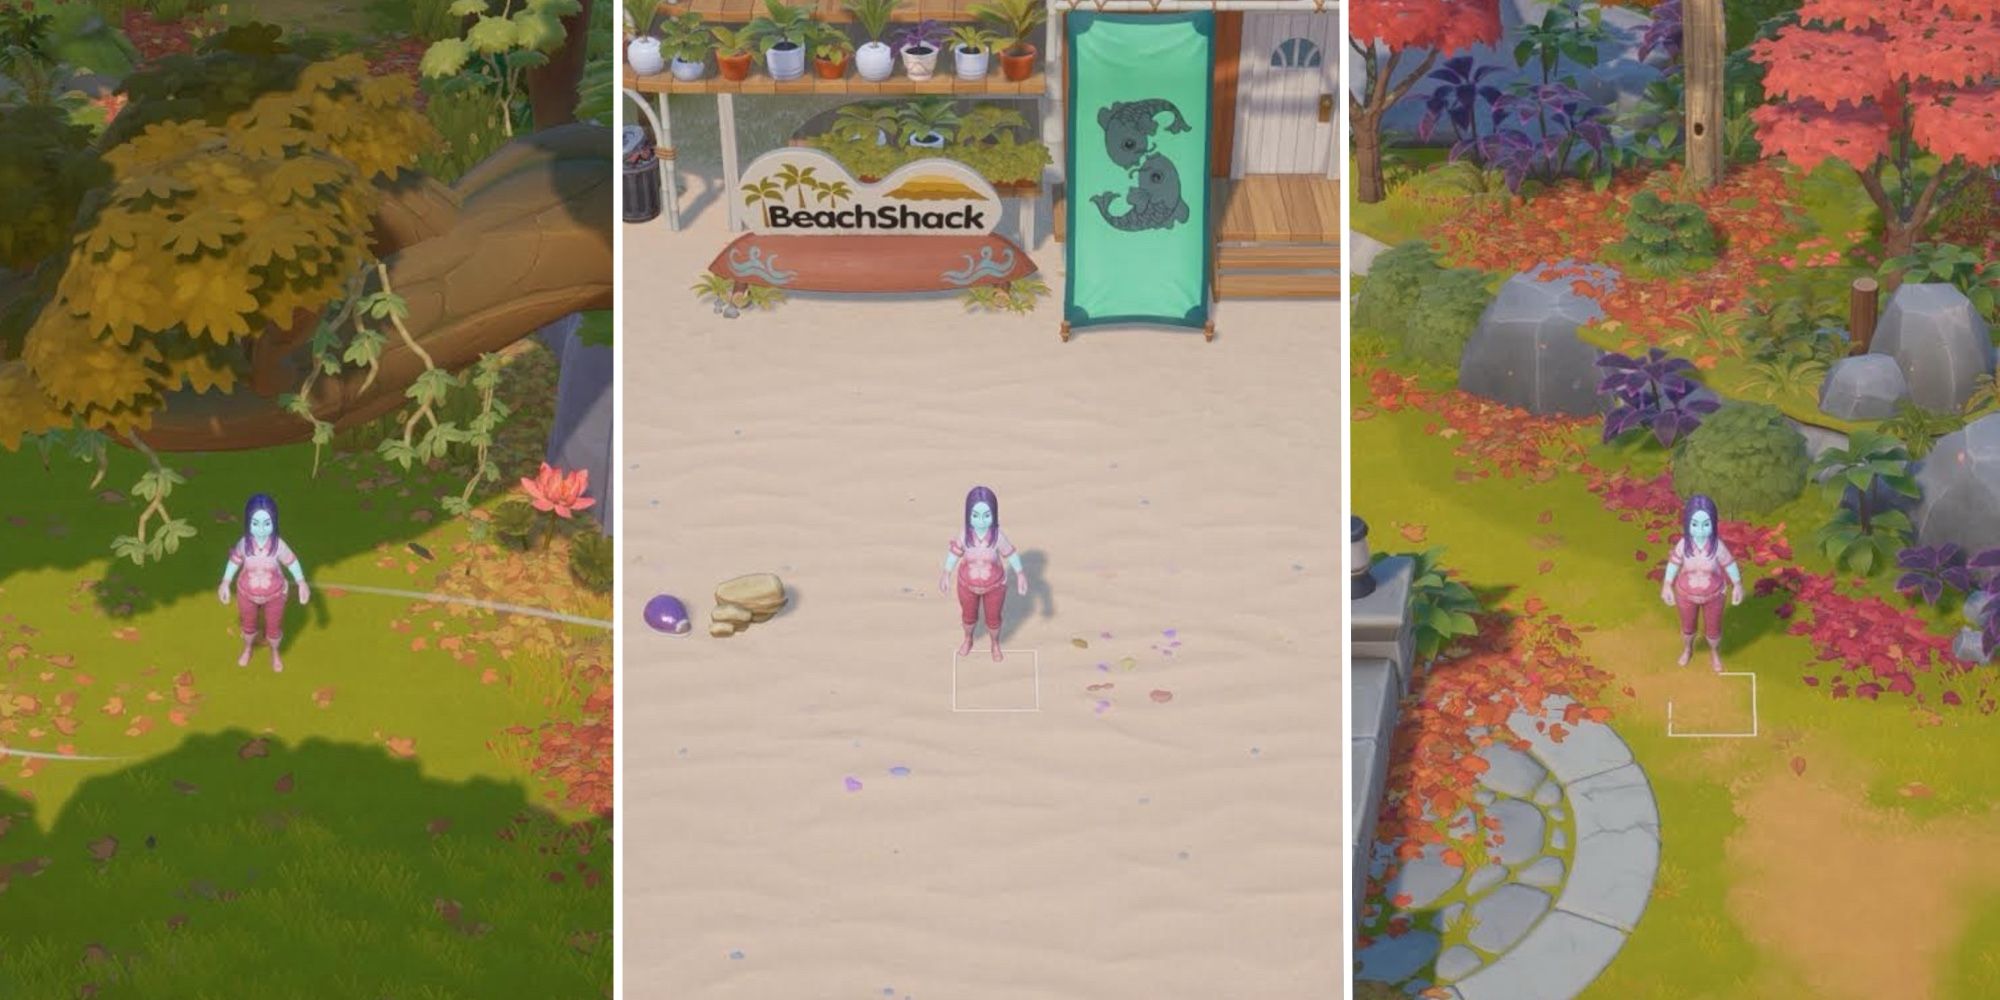 Coral Island avatar standing on the beach in the center panel, at the entrance to the Deep Forest in the left panel, and in the right panel at the paths by the lake. All are good spots for foraging items.